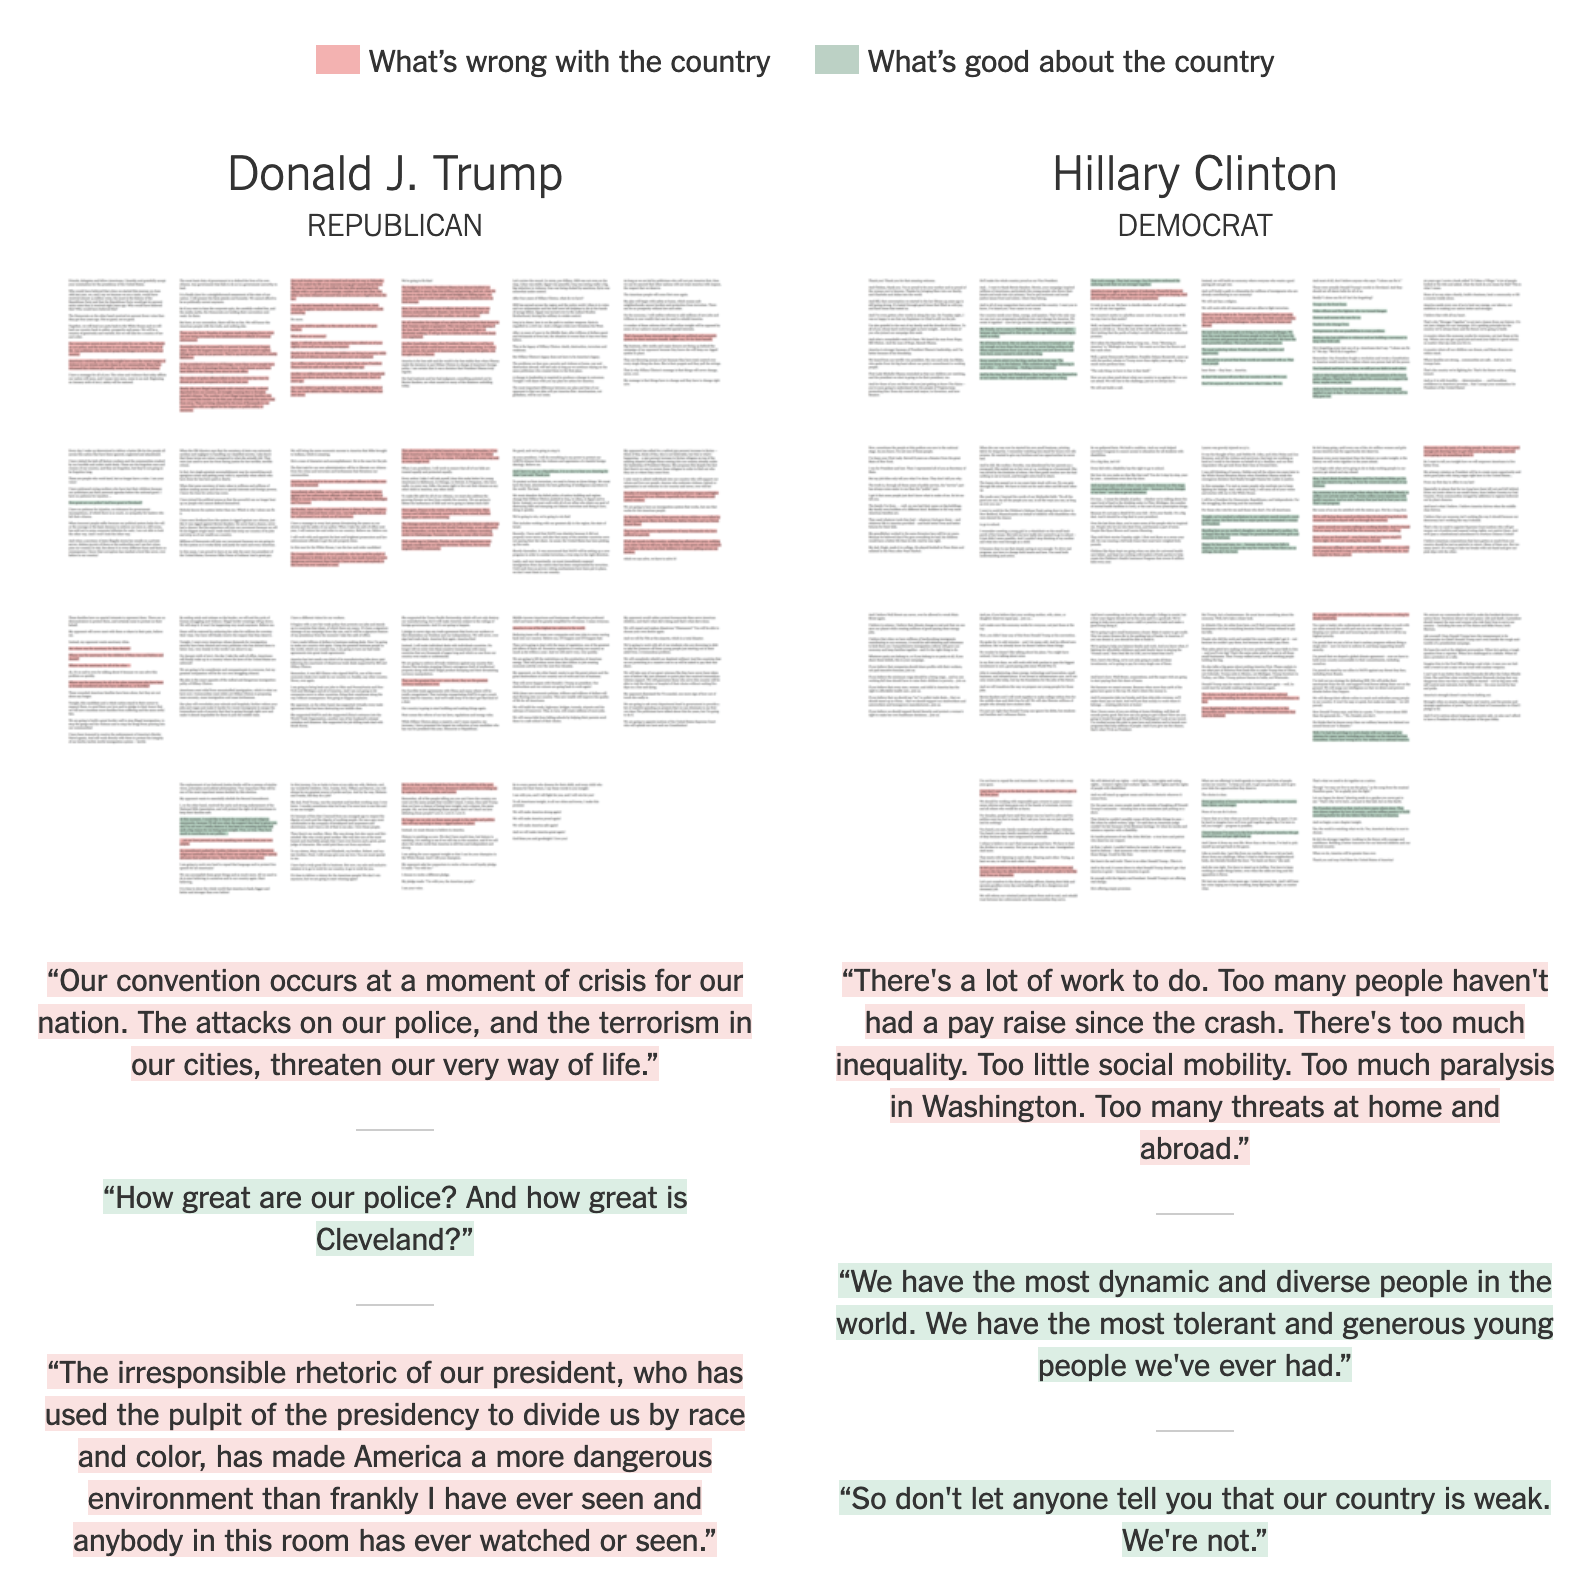 A visual comparison of speeches by Donald Trump and Hillary Clinton